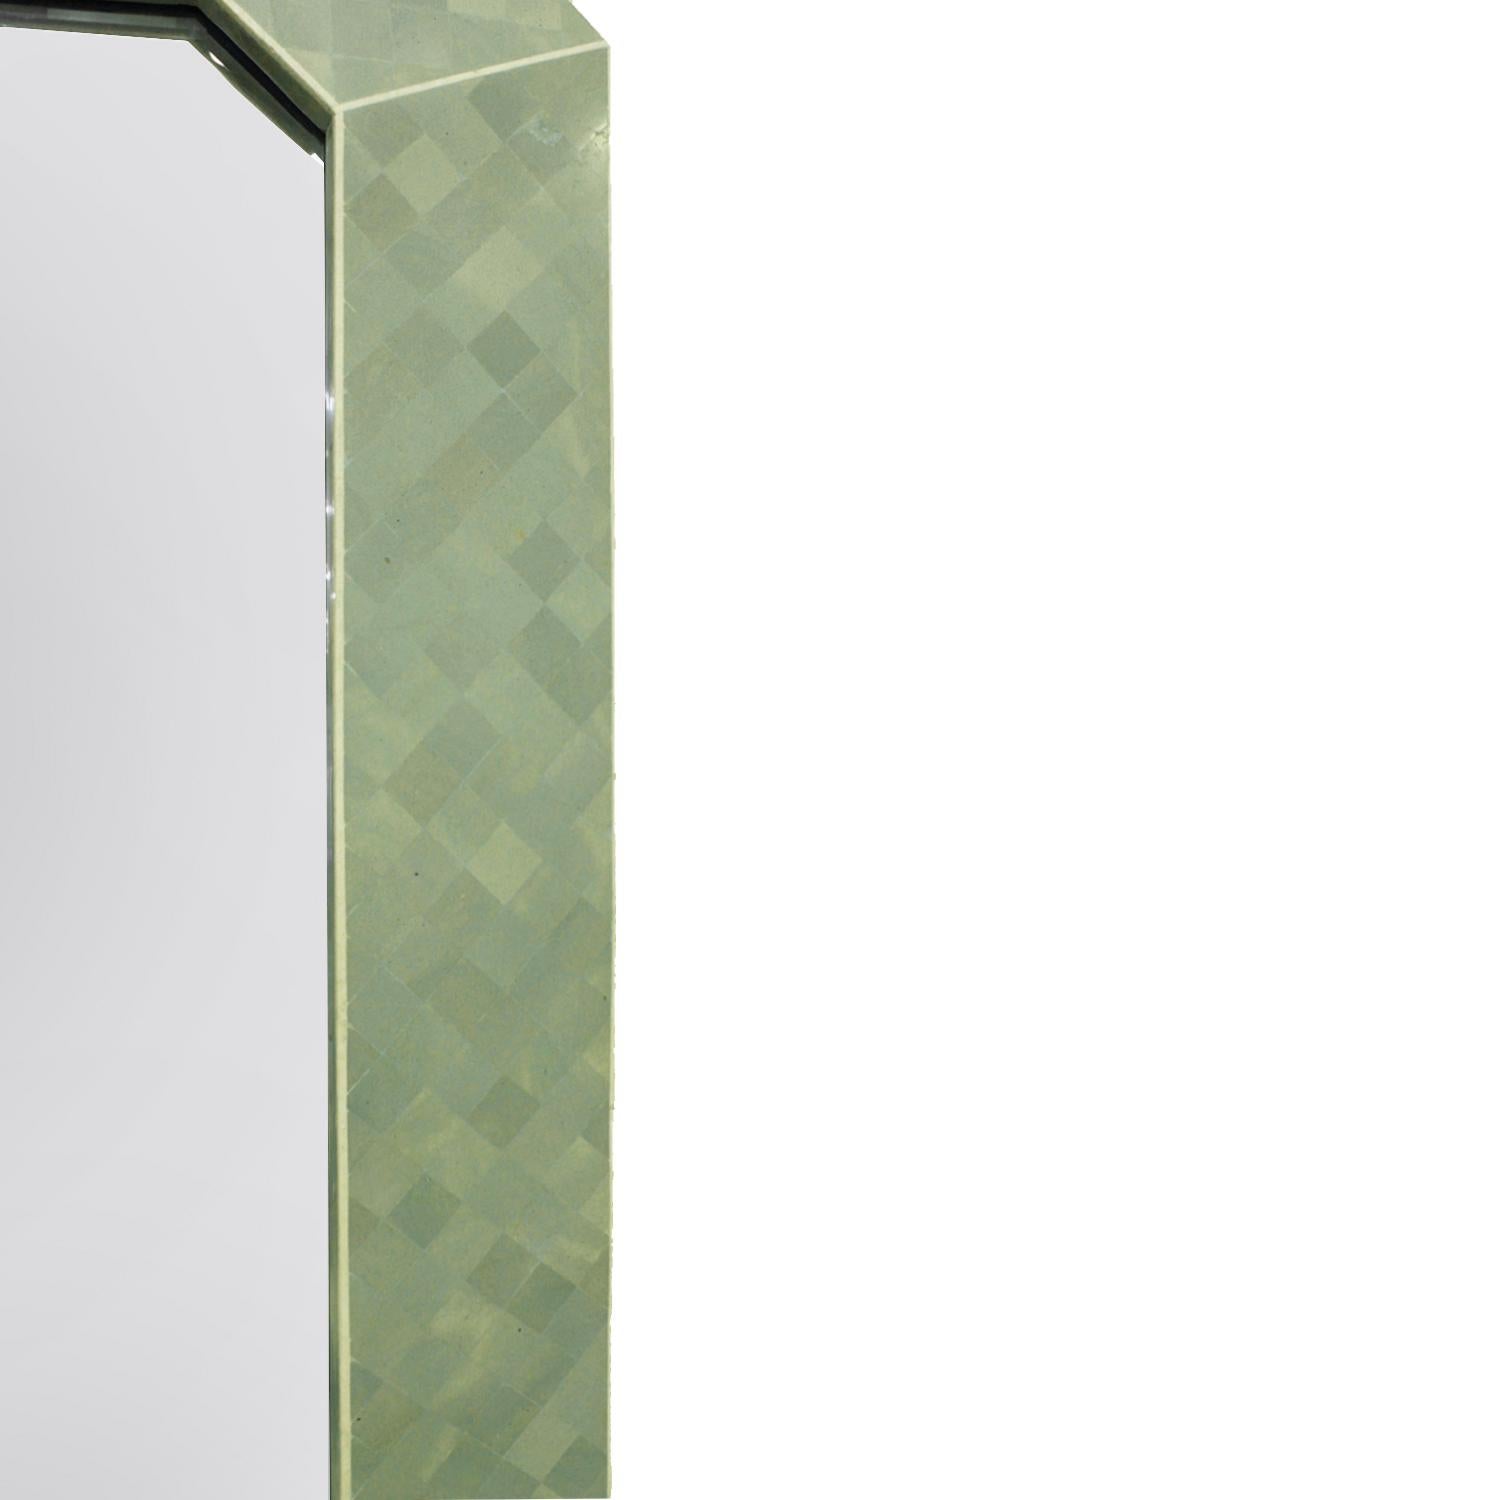 Hand-Crafted Wall Mirror in Tessellated Stone with Bone Inlays, 1970s